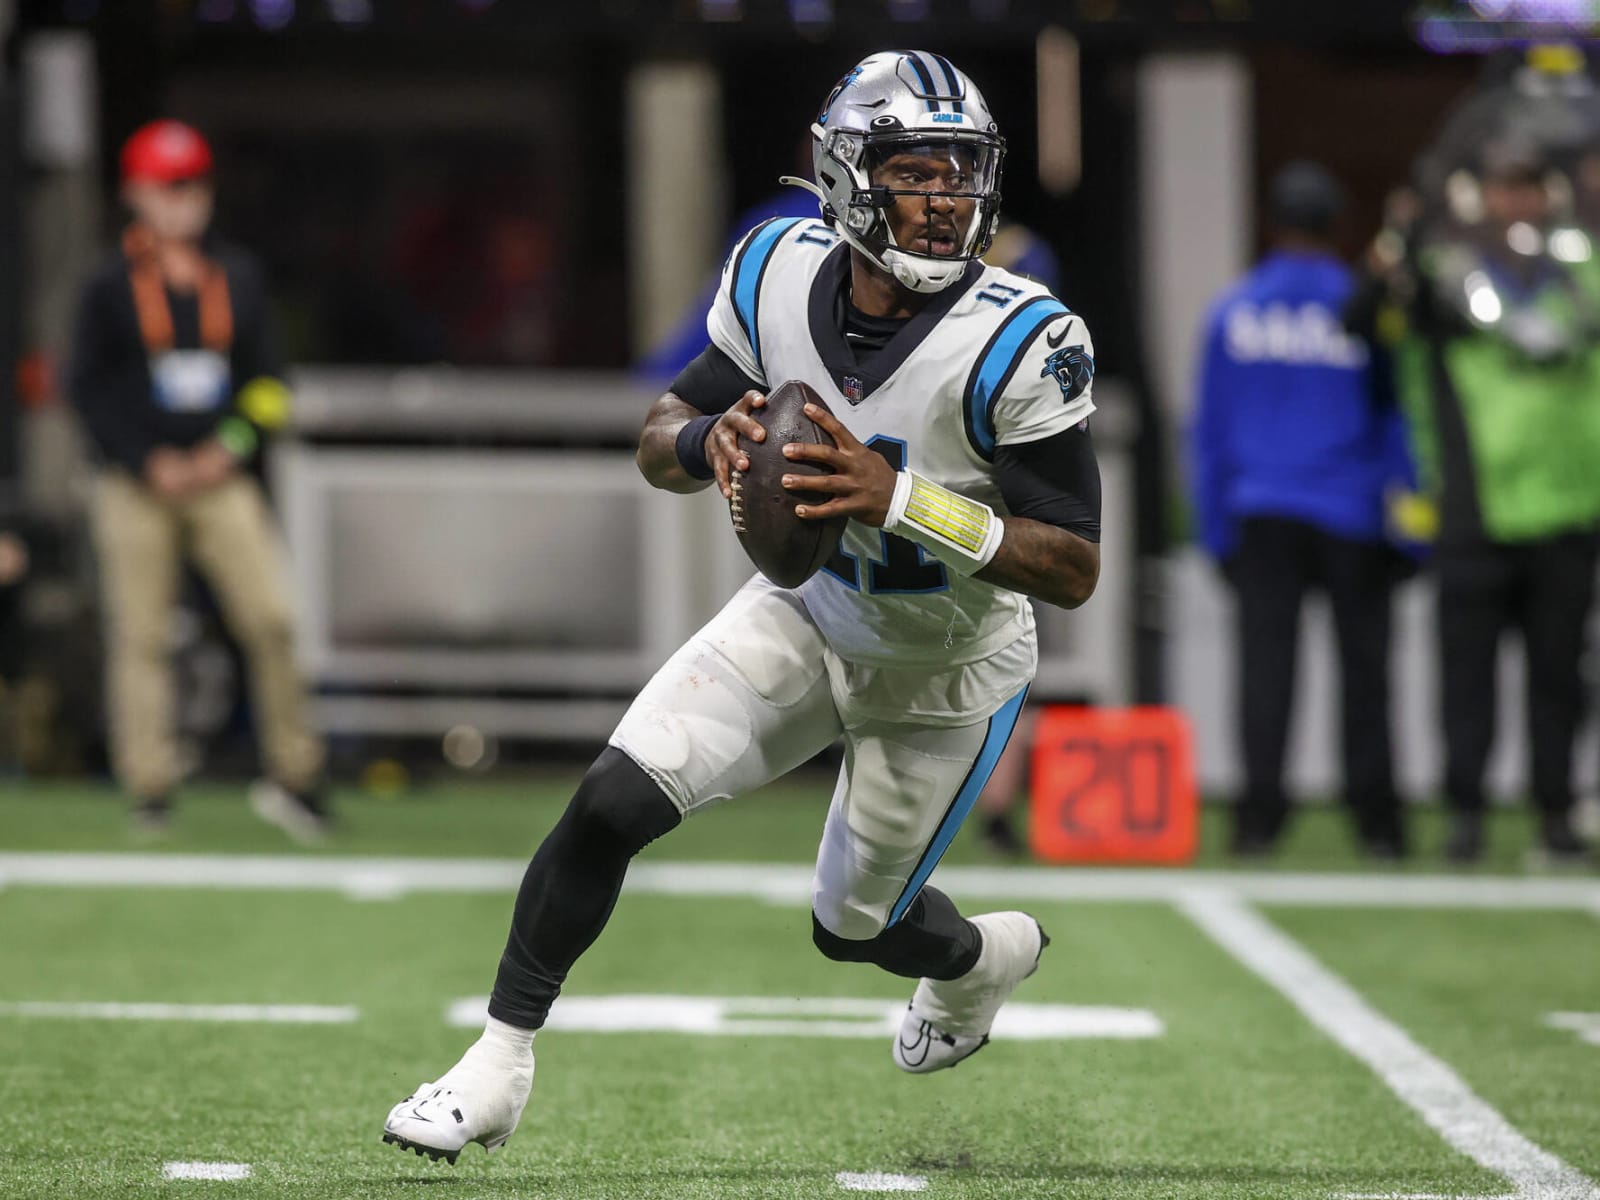 P.J. Walker to start for Panthers vs Bengals in NFL Week 9 - Cincy Jungle